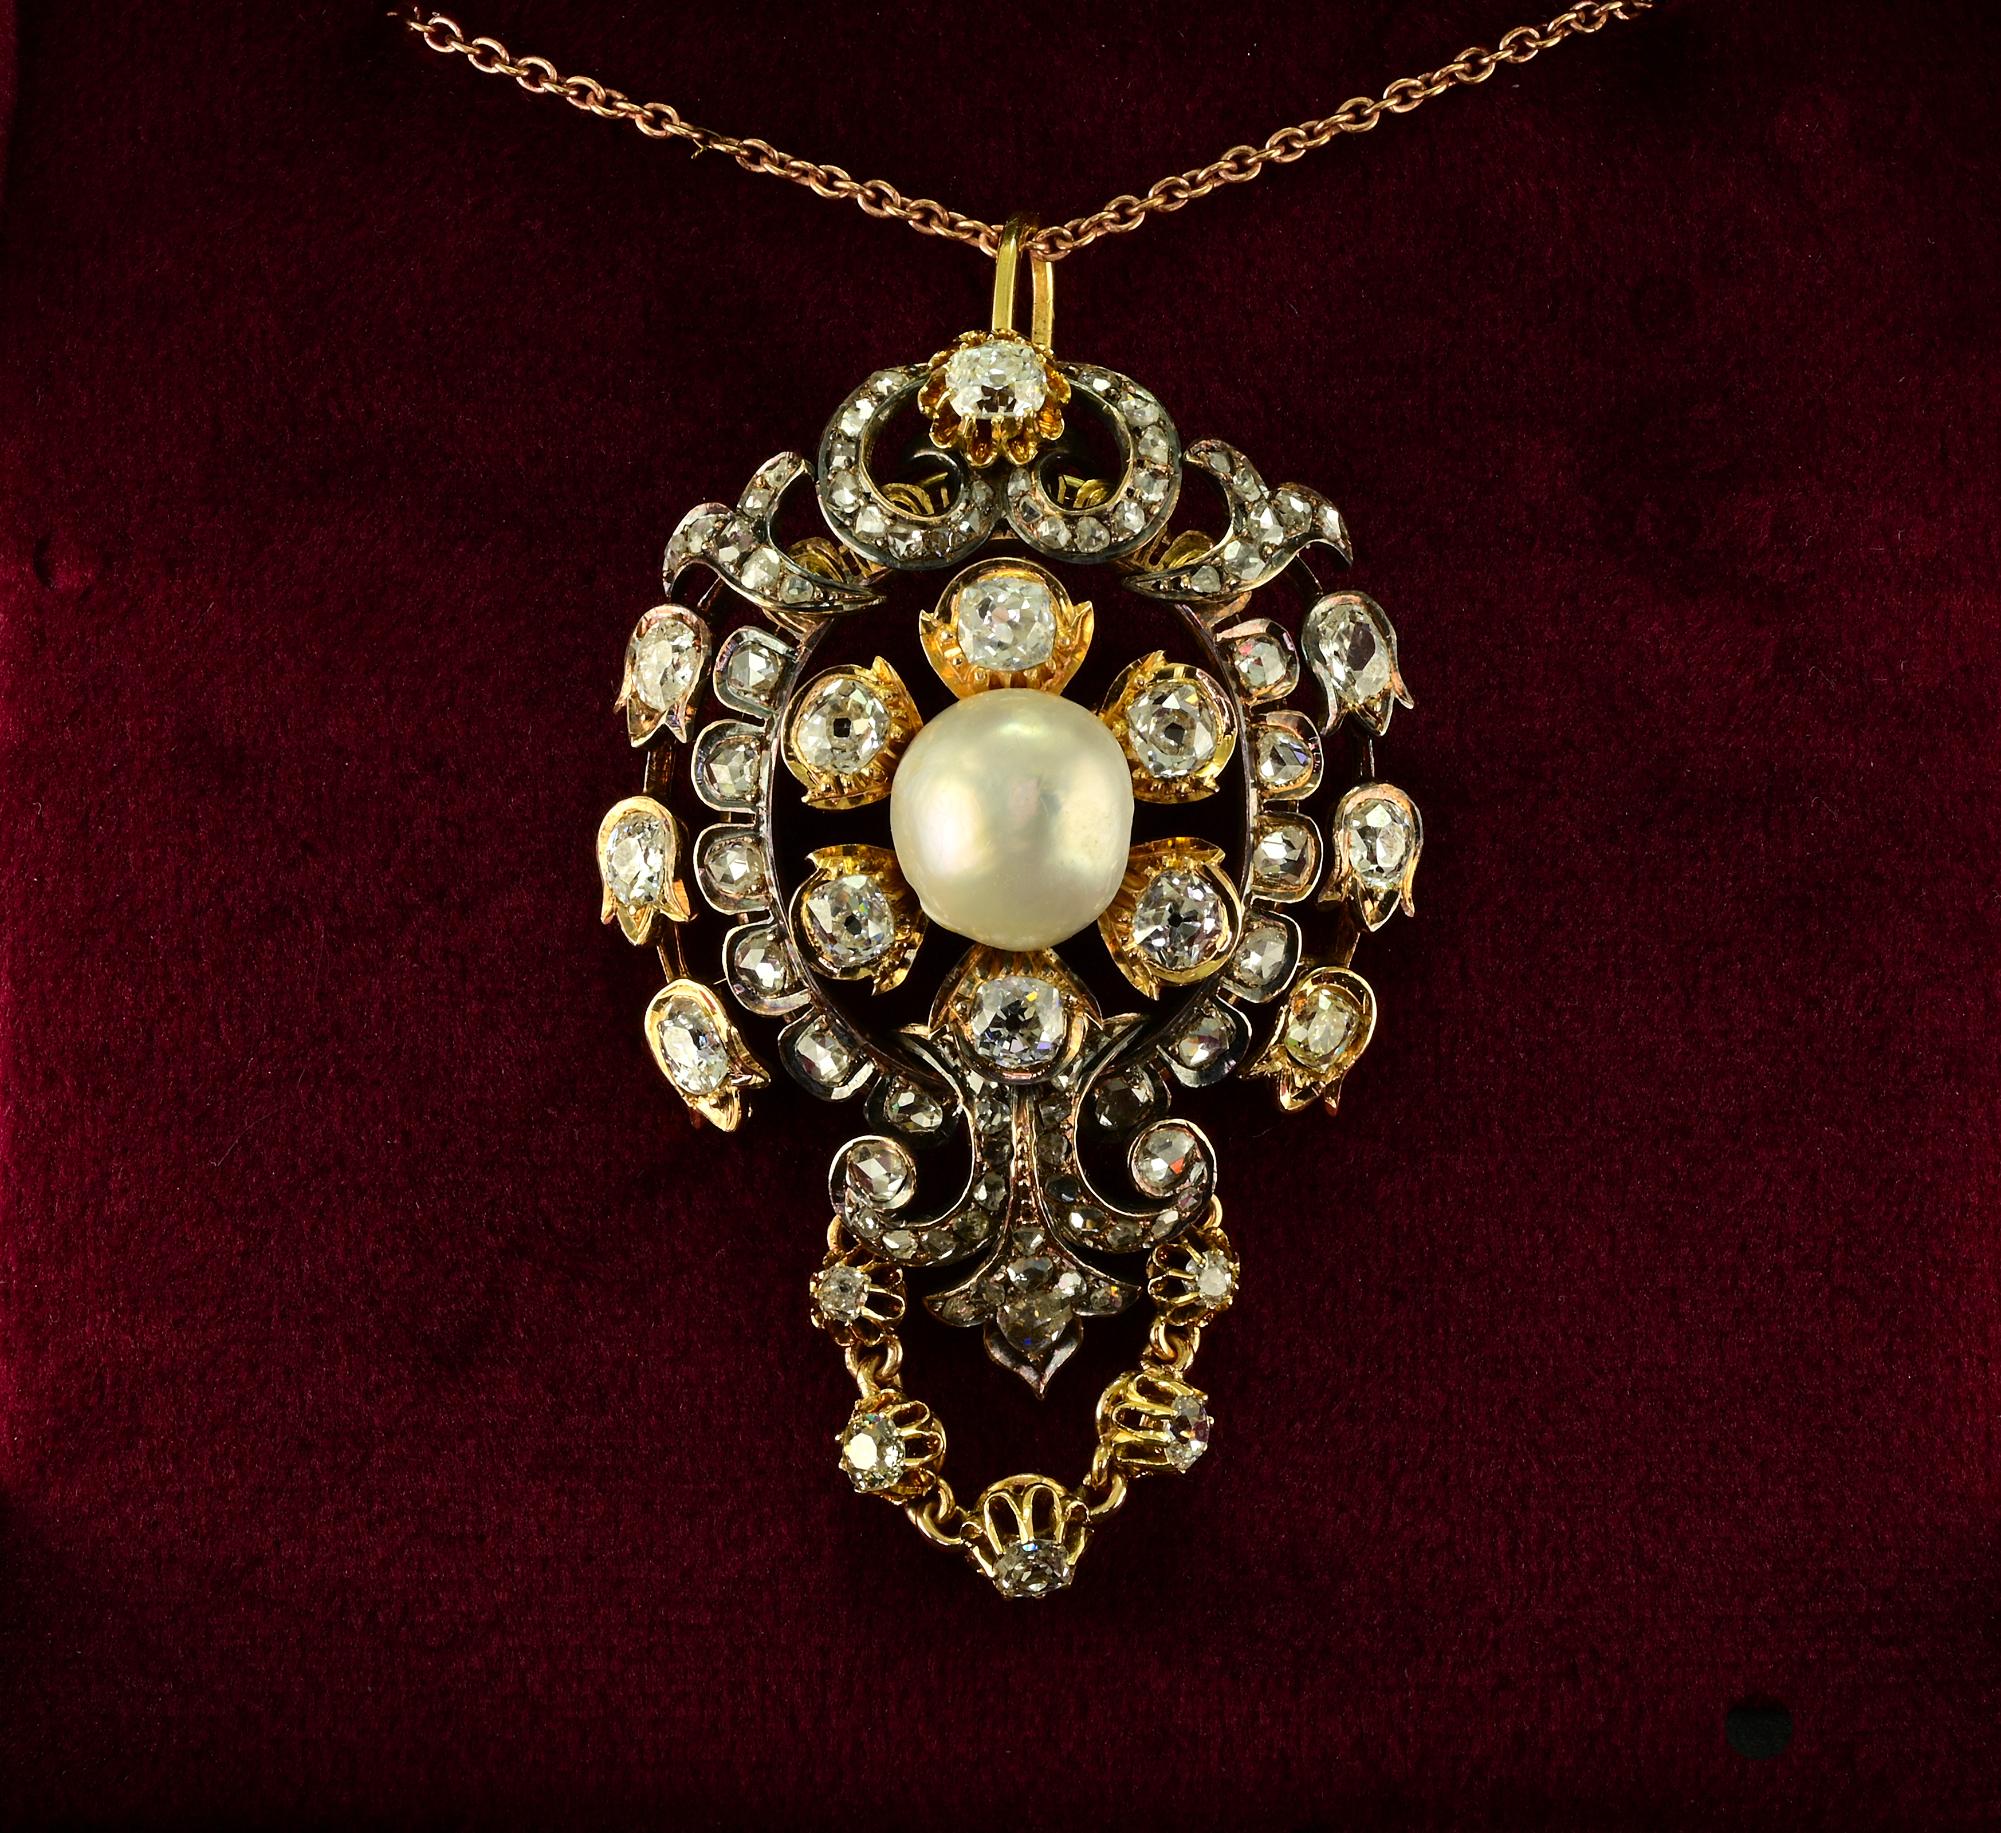 This outstanding antique Victorian era pendant is 1870 ca
Artful hand crafted in the glorious crafting of the era, 18 Kt with portions of silver topping over gold to the inner Diamond frame
Spectacular, intricate, exuberant design, overwhelmed by